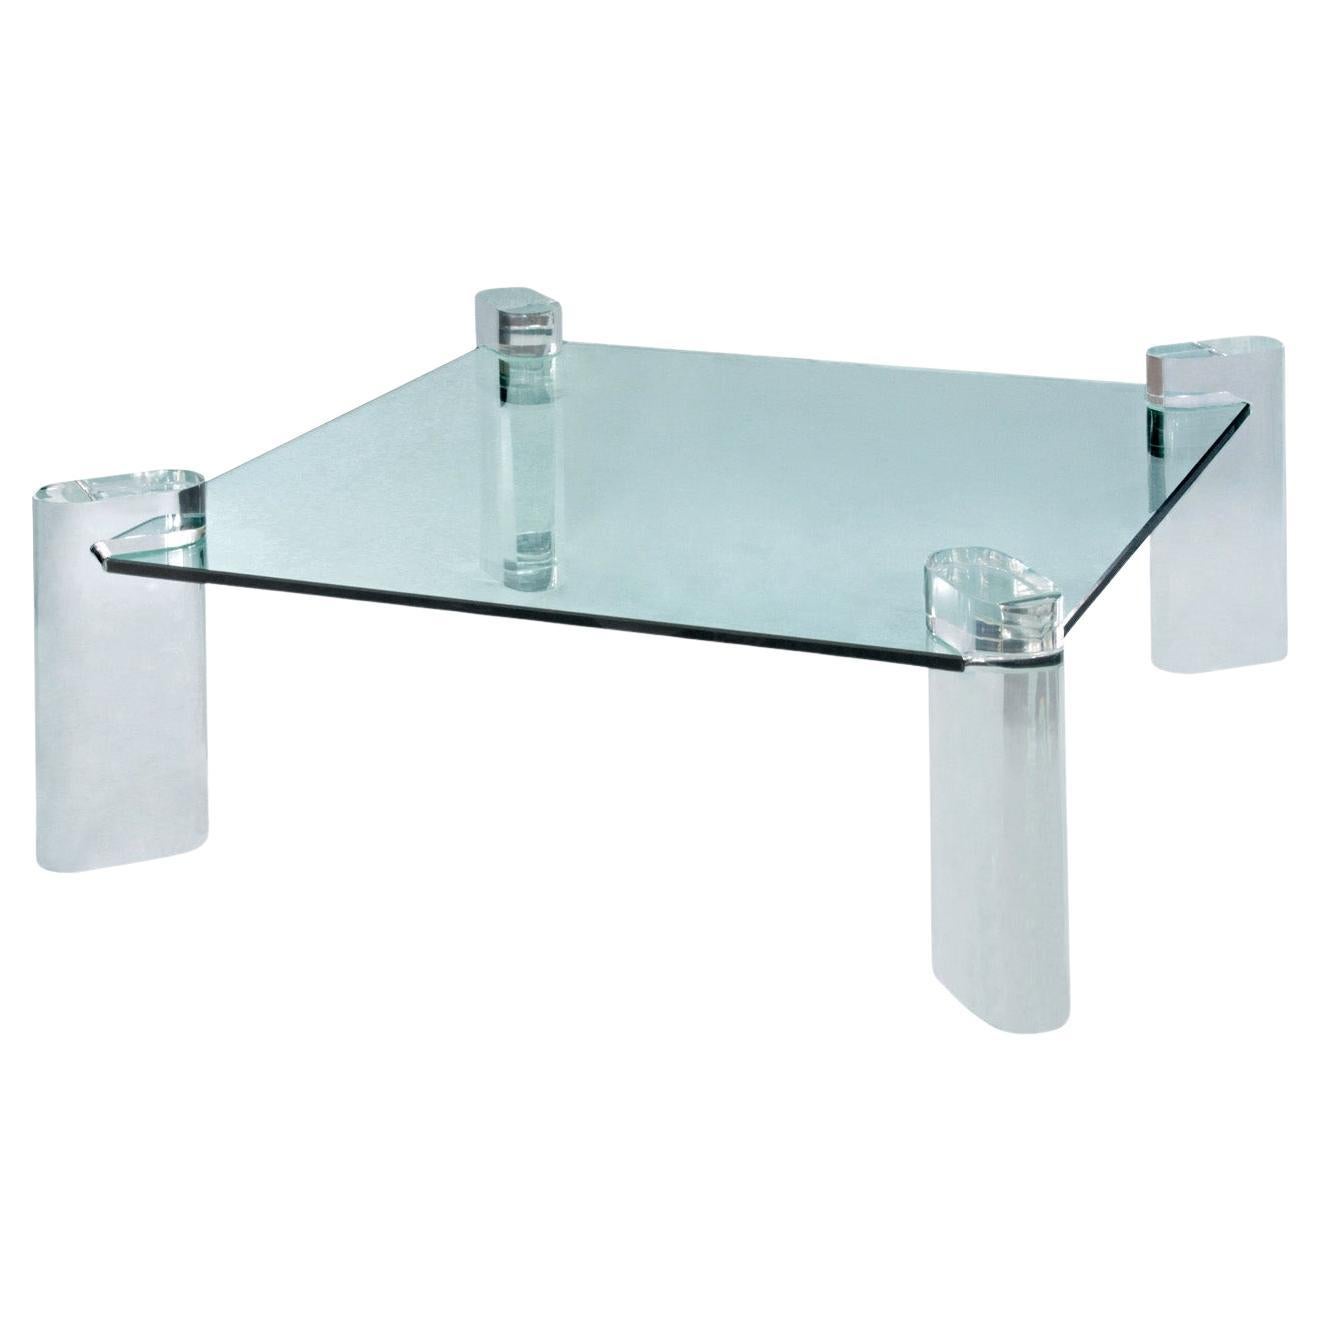 Karl Springer "Lucite Leg Coffee Table" with Thick Glass Top 1980s For Sale